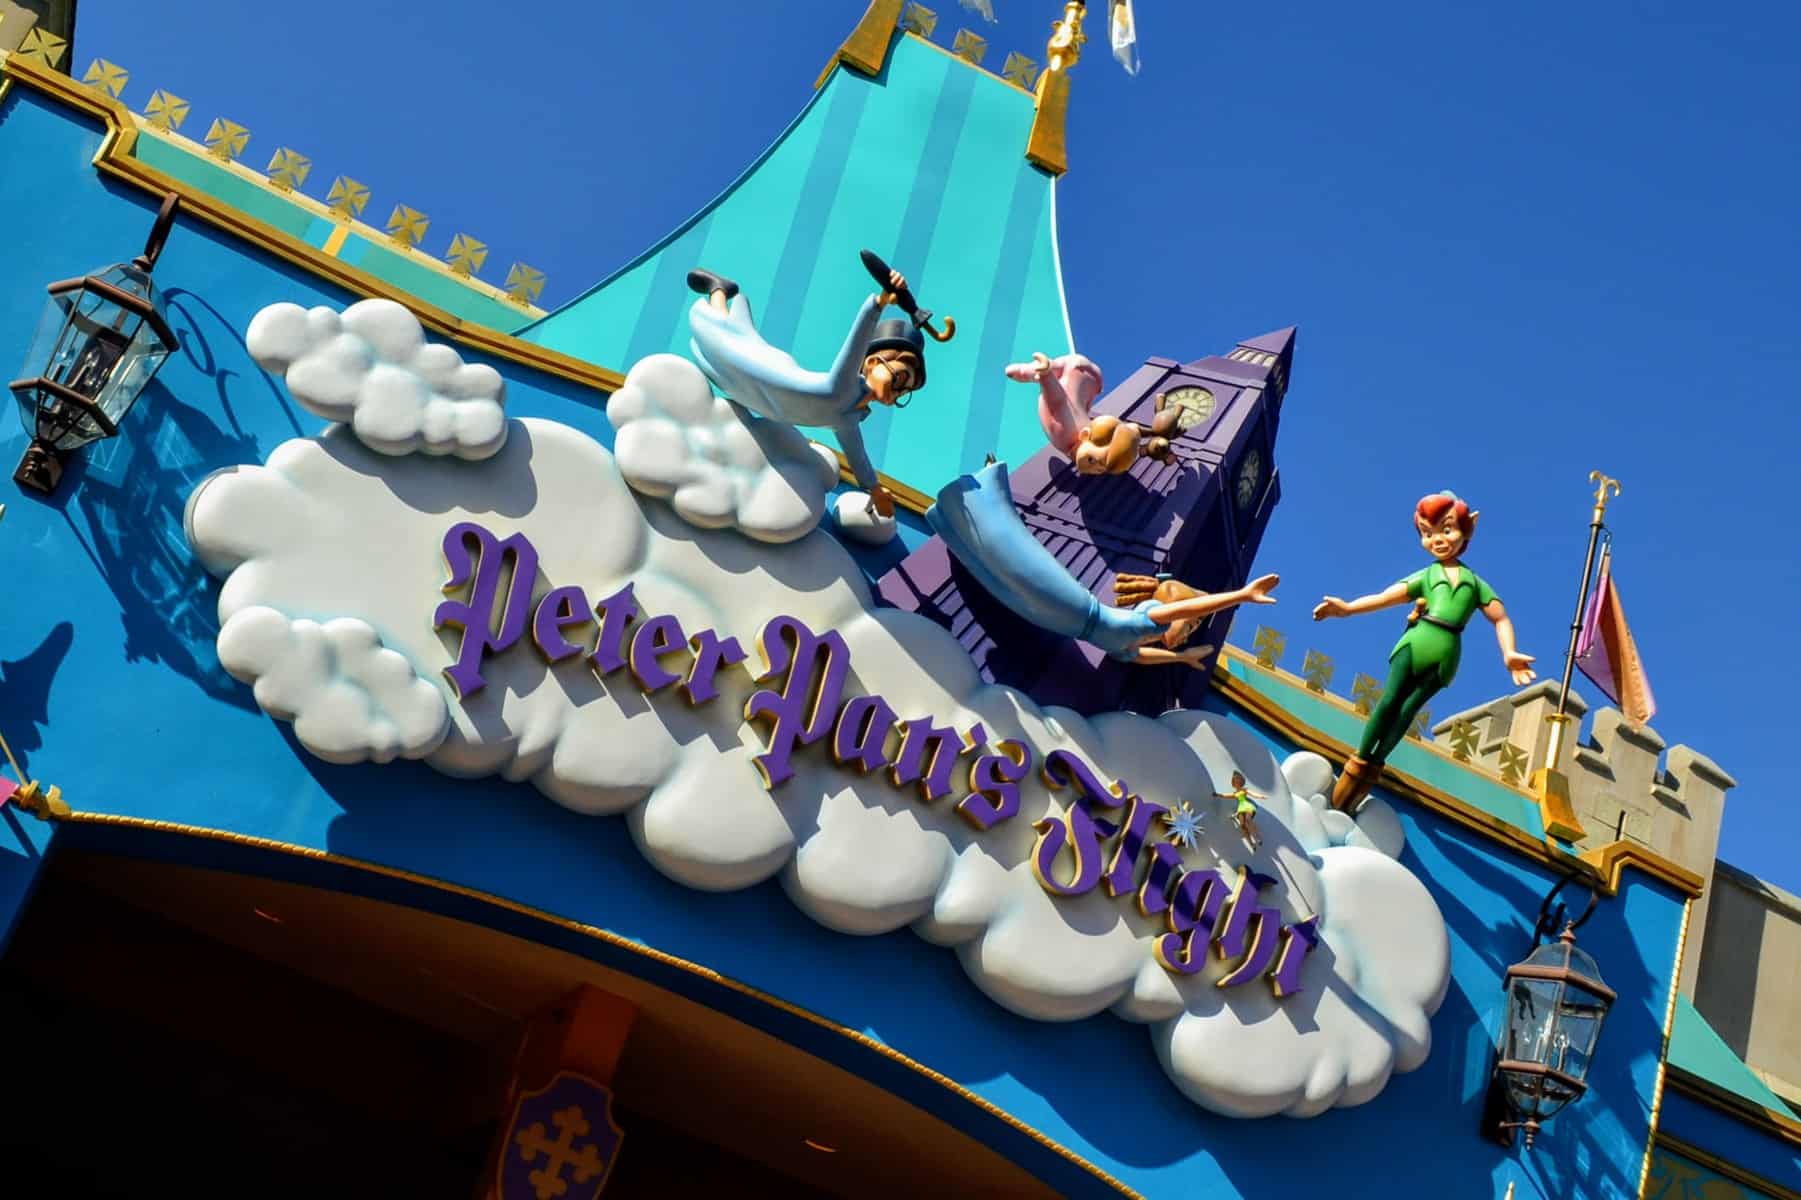 Complete Guide to Peter Pan’s Flight at Magic Kingdom